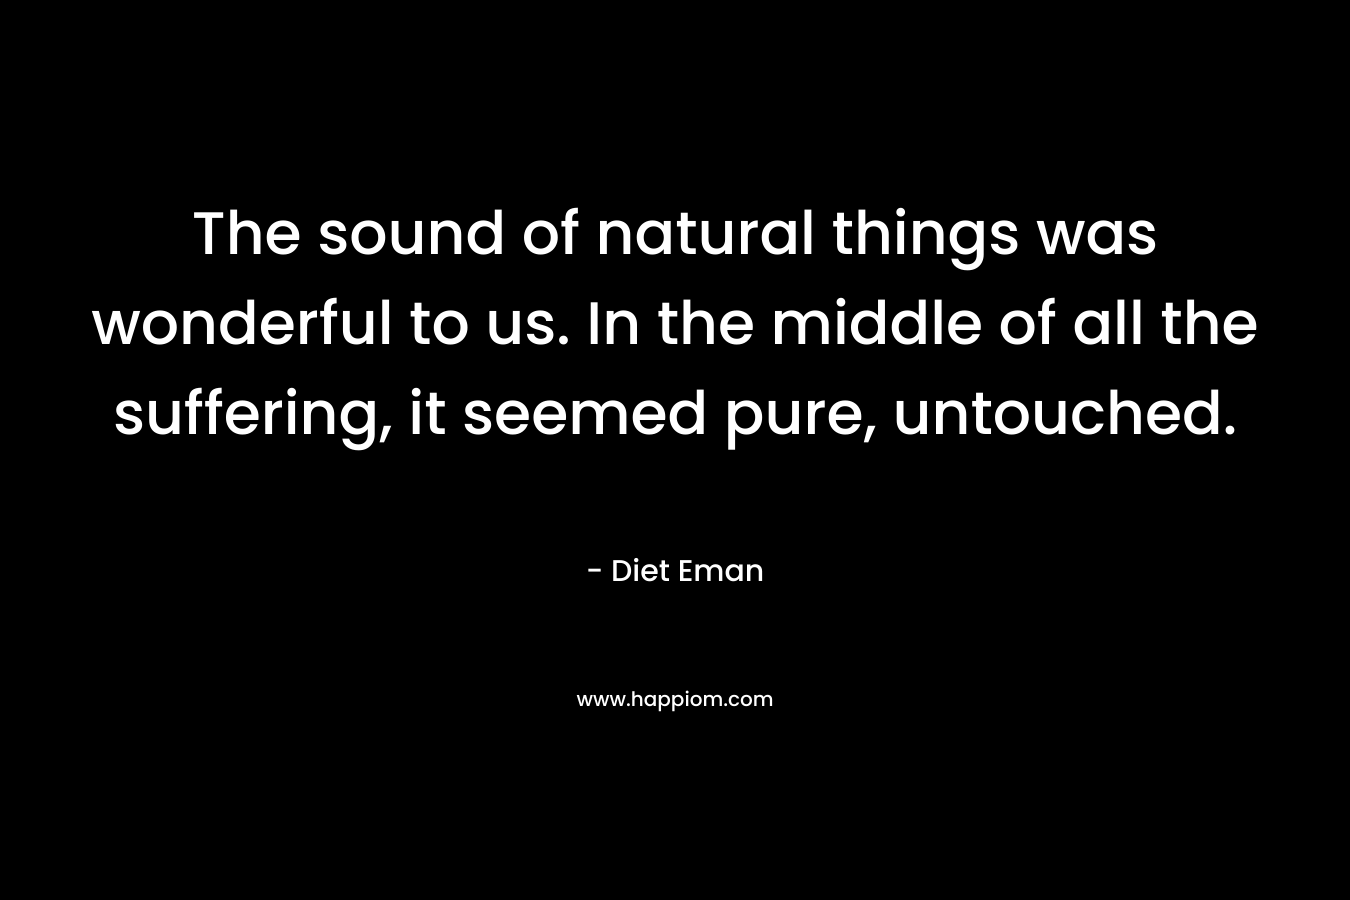 The sound of natural things was wonderful to us. In the middle of all the suffering, it seemed pure, untouched.